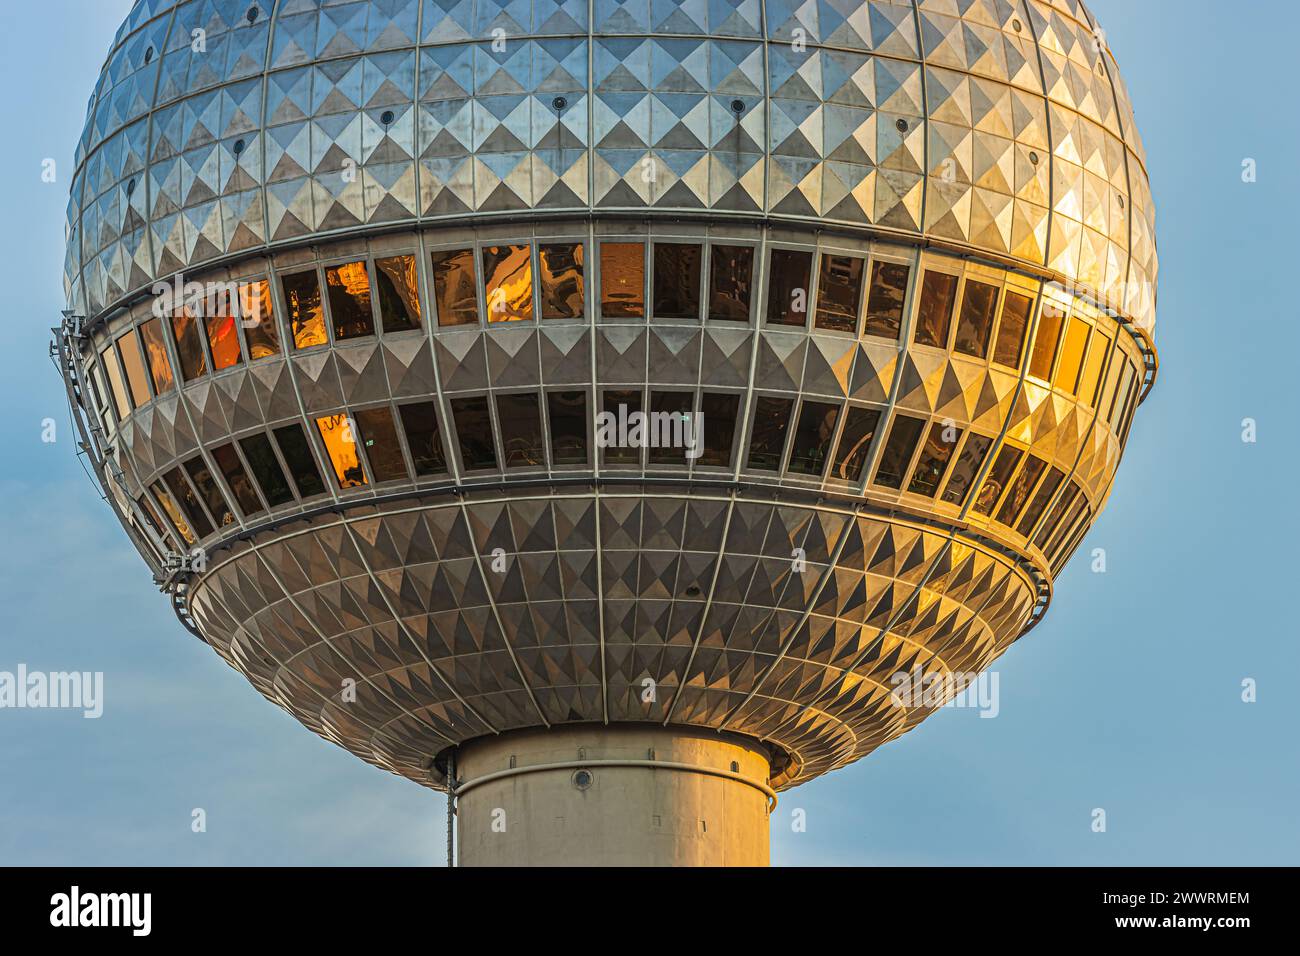 Details from the television tower in Berlin. Sphere of the tallest building in the capital of Germany with reflections on the window panes of the glas Stock Photo